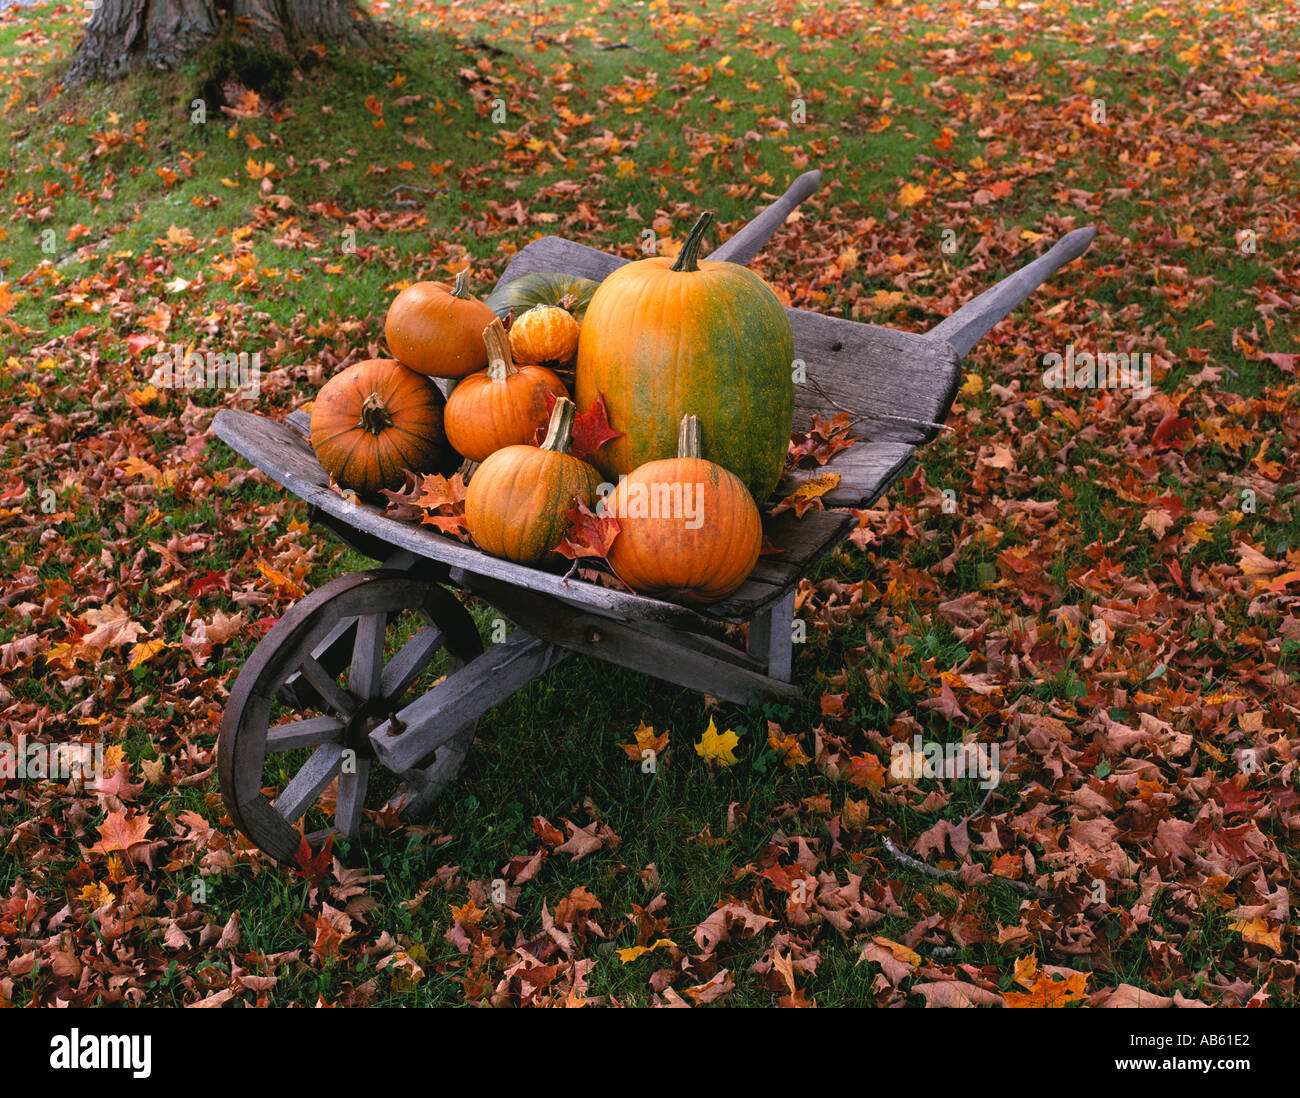 Pumpkins in old wooden wheelbarrow with fall leaves on ground New Hampshire Stock Photo